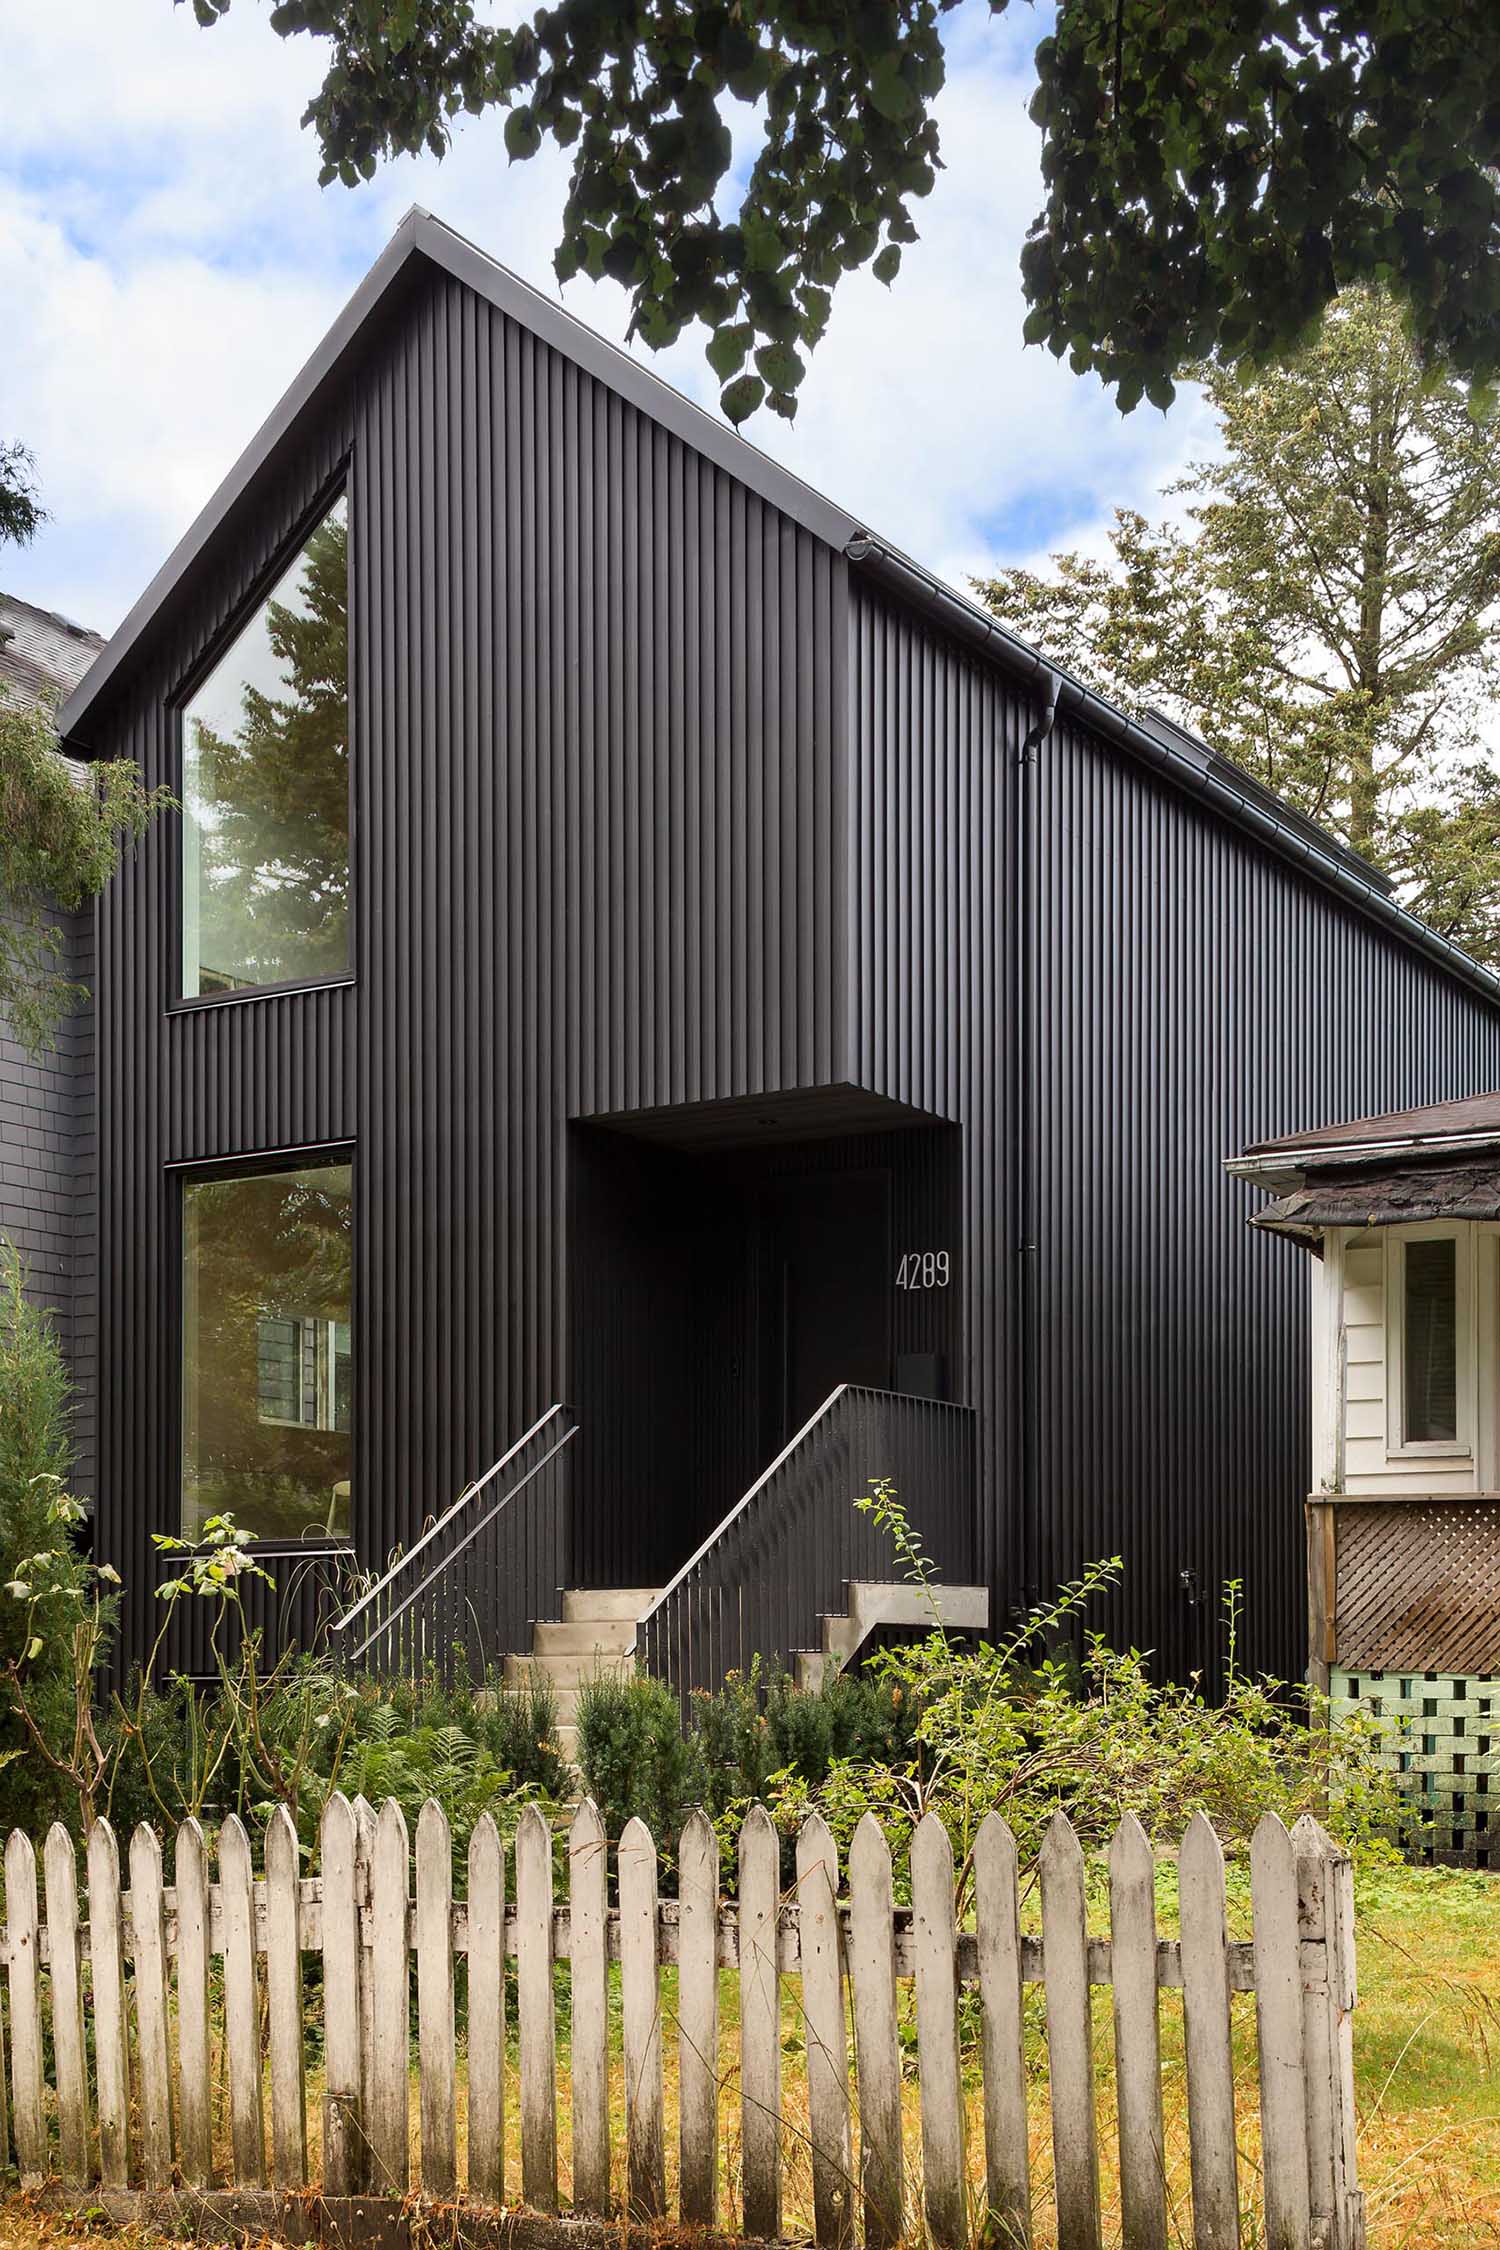 This modern house is clad in narrow board and batten siding with a black finish, and has a matching metal standing seam roof that's sloped.